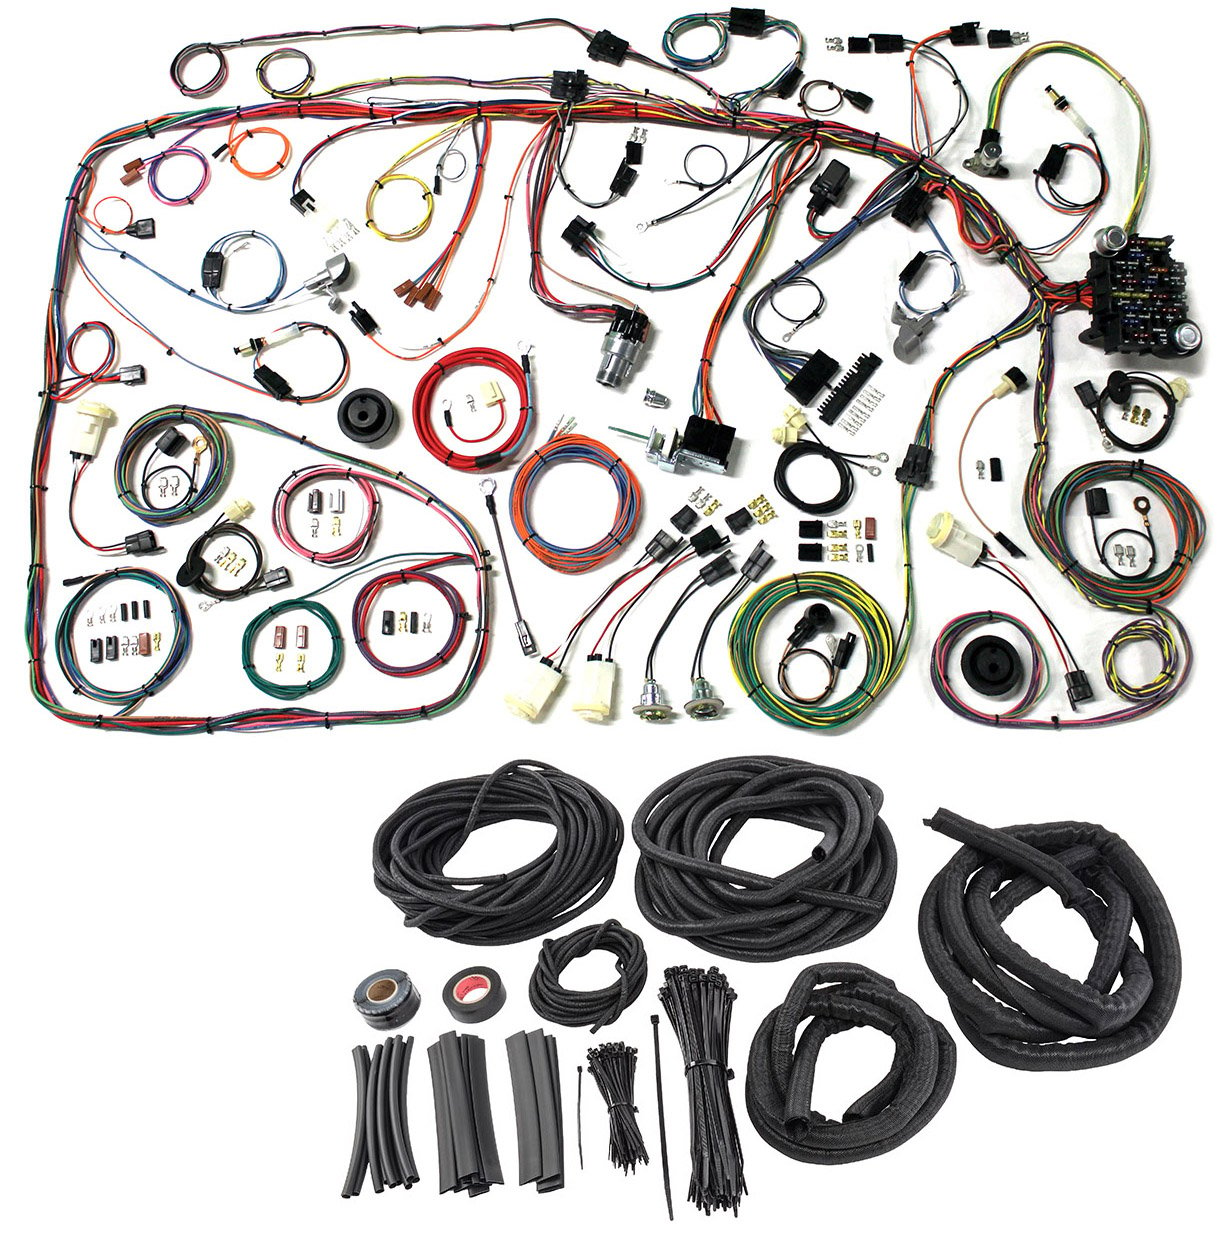 Harness & Braid Cover Kit for 1973-1979 Ford